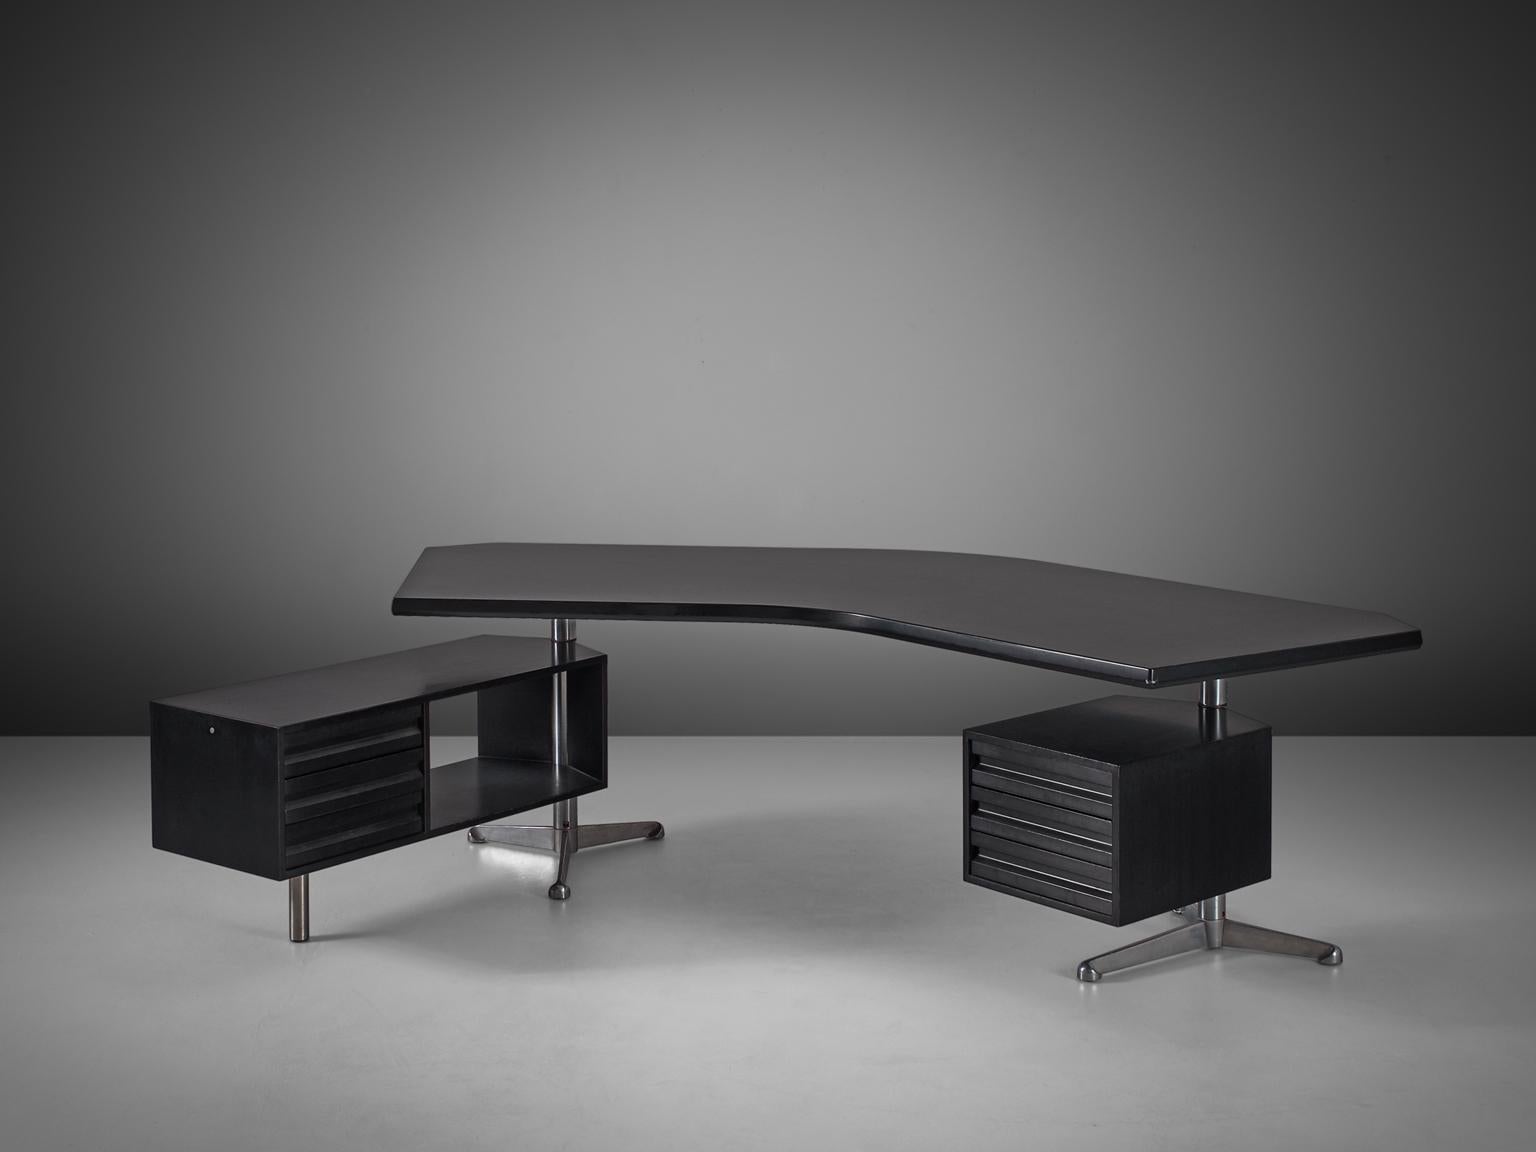 Desk T-96 'Boomerang', in wood and metal, by Osvaldo Borsani for Tecno, Italy 1956. 

A very nice black version of this well known design by Osvaldo Borsani. The two revolving cabinets are held in place by the characteristic stainless steel